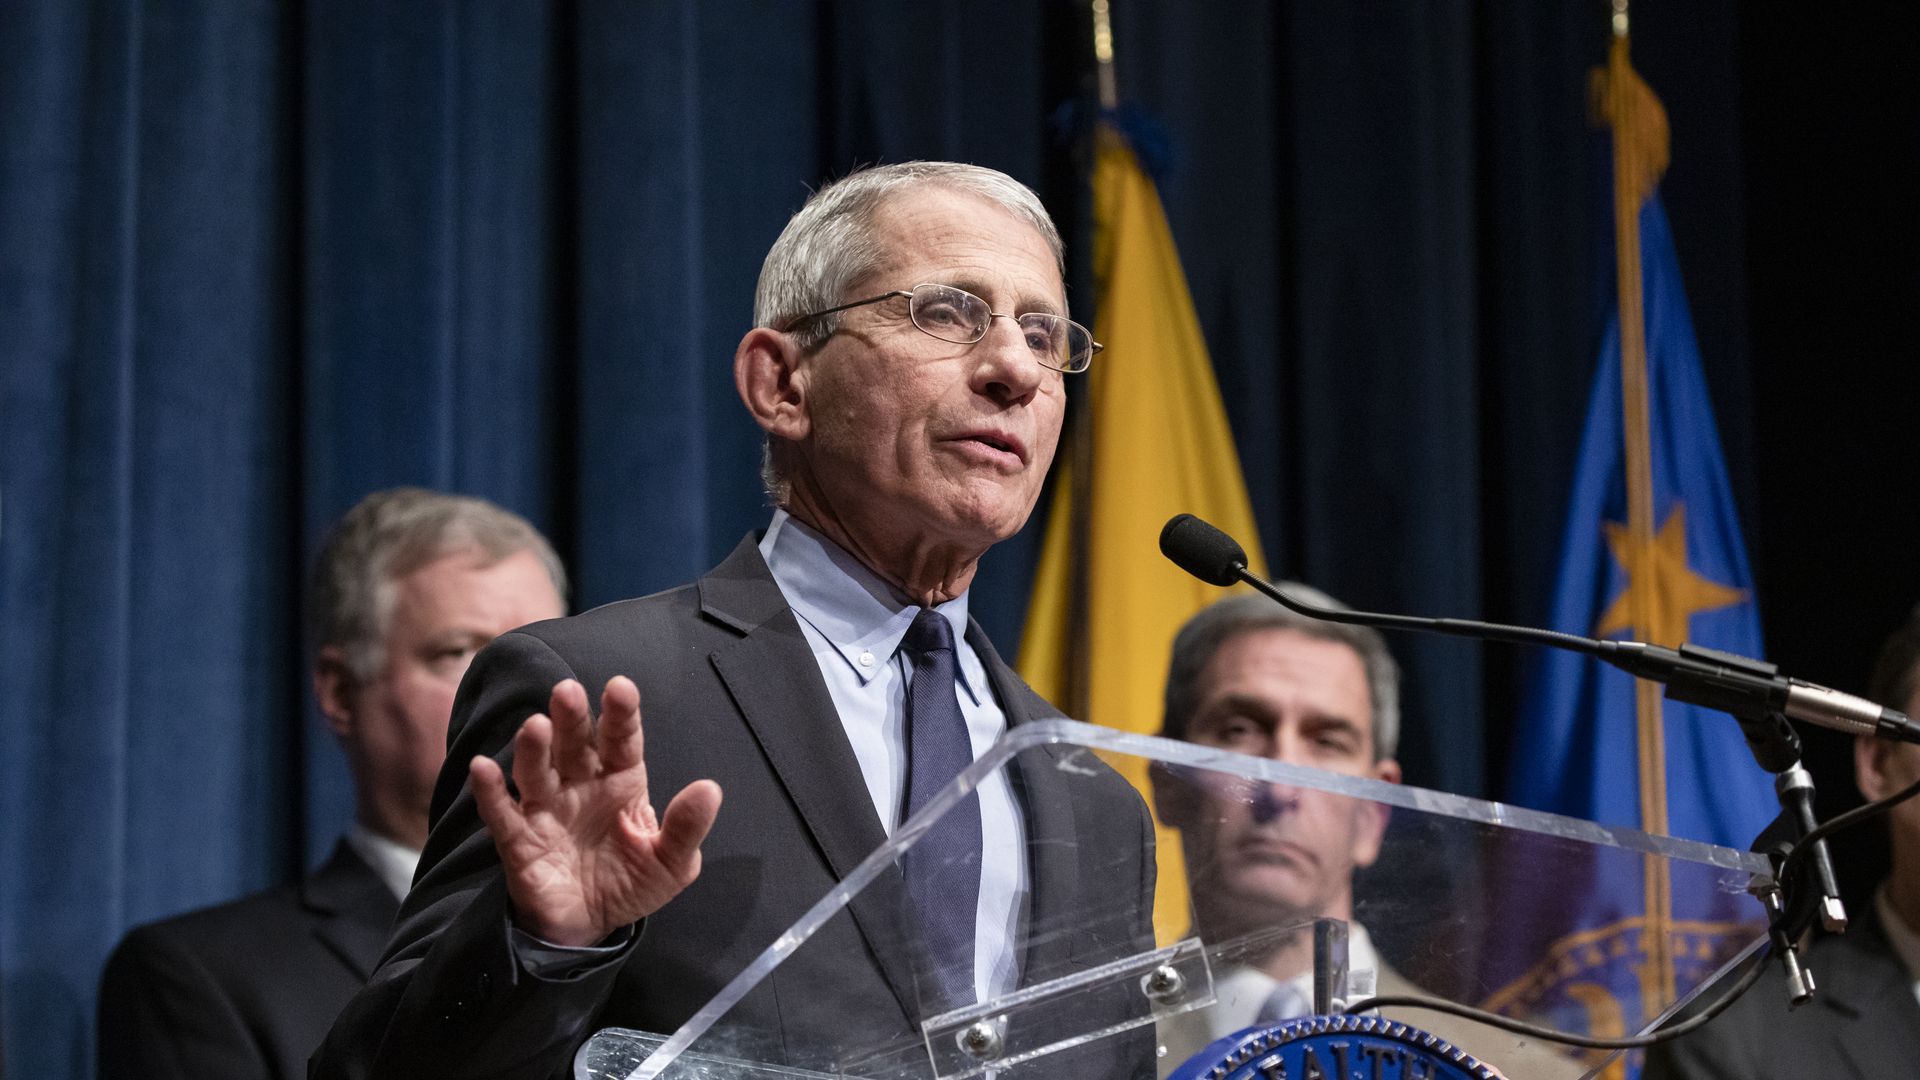 National Institute of Allergy and Infectious Diseases Director Dr. Anthony Fauci speaks during a press conference on recent developments with the coronavirus